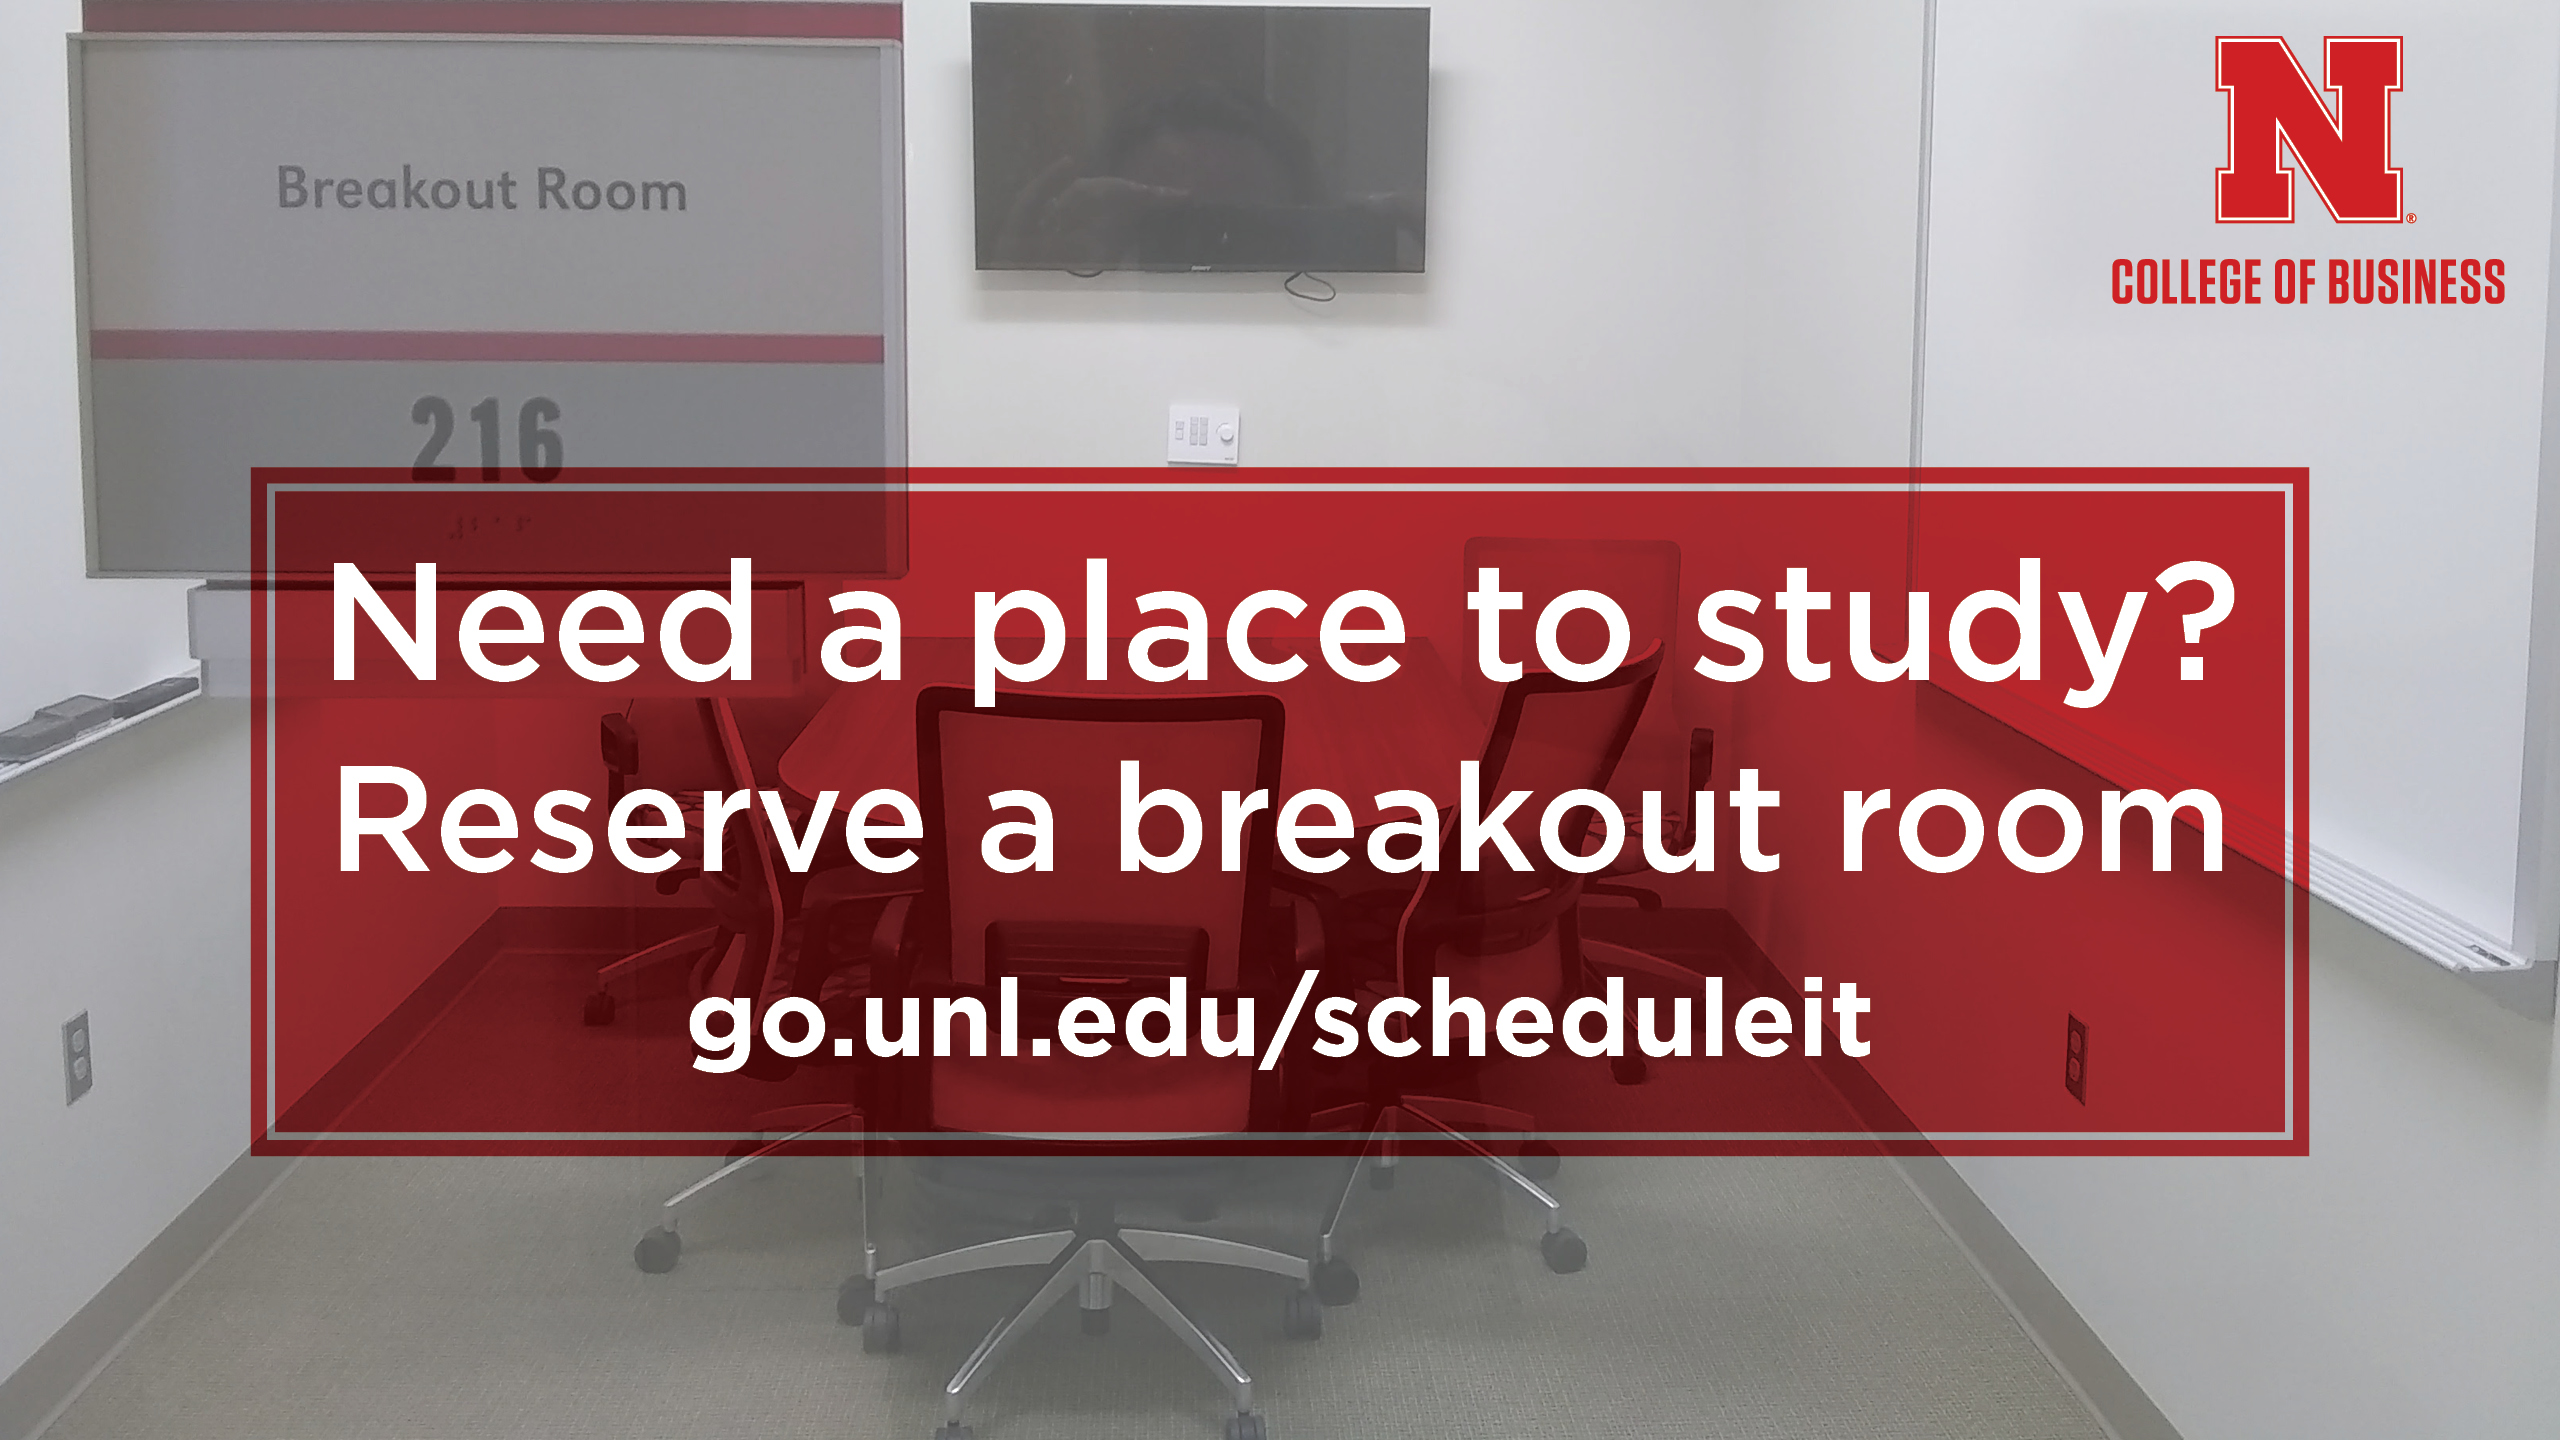 Breakout rooms are a perfect place to study.